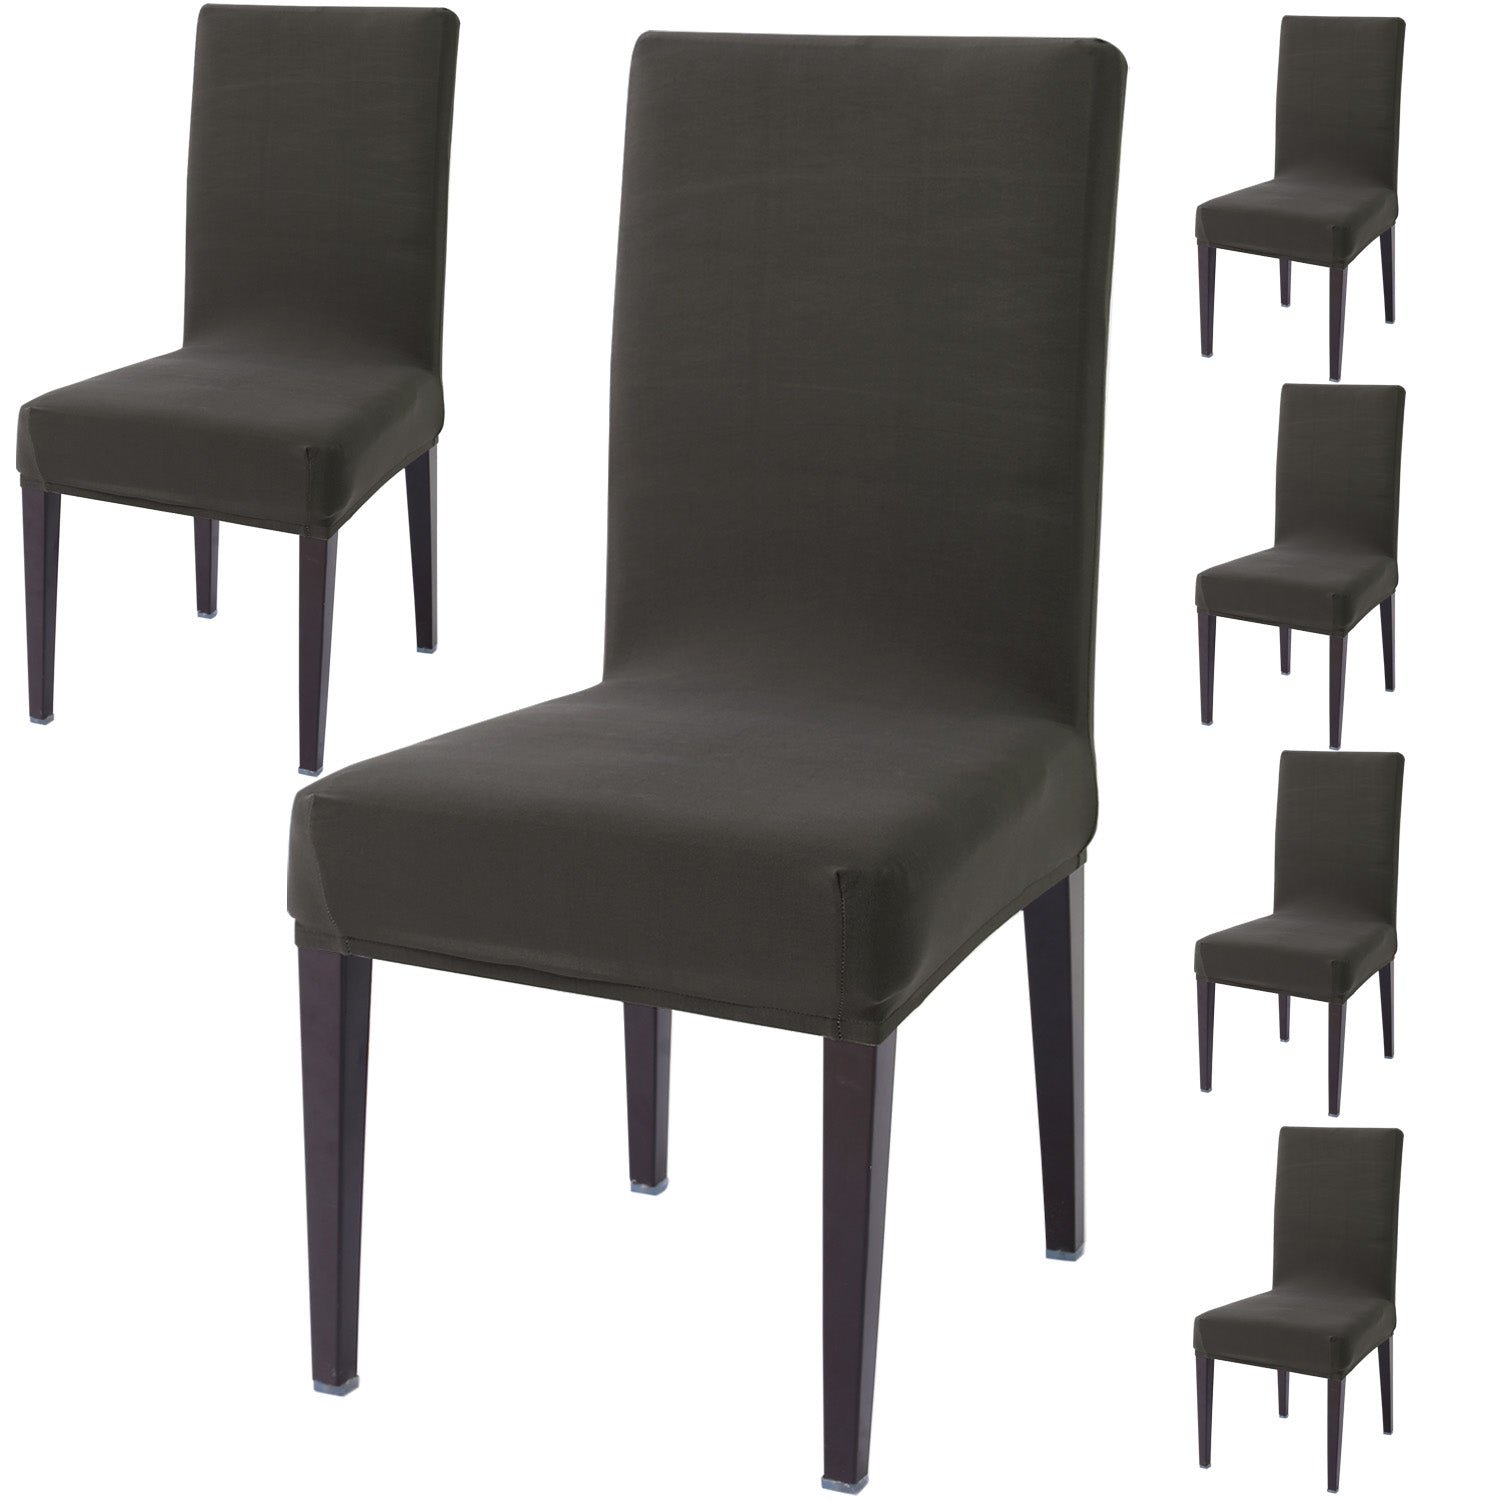 Elastic Stretchable Dining Chair Cover, Dark Grey